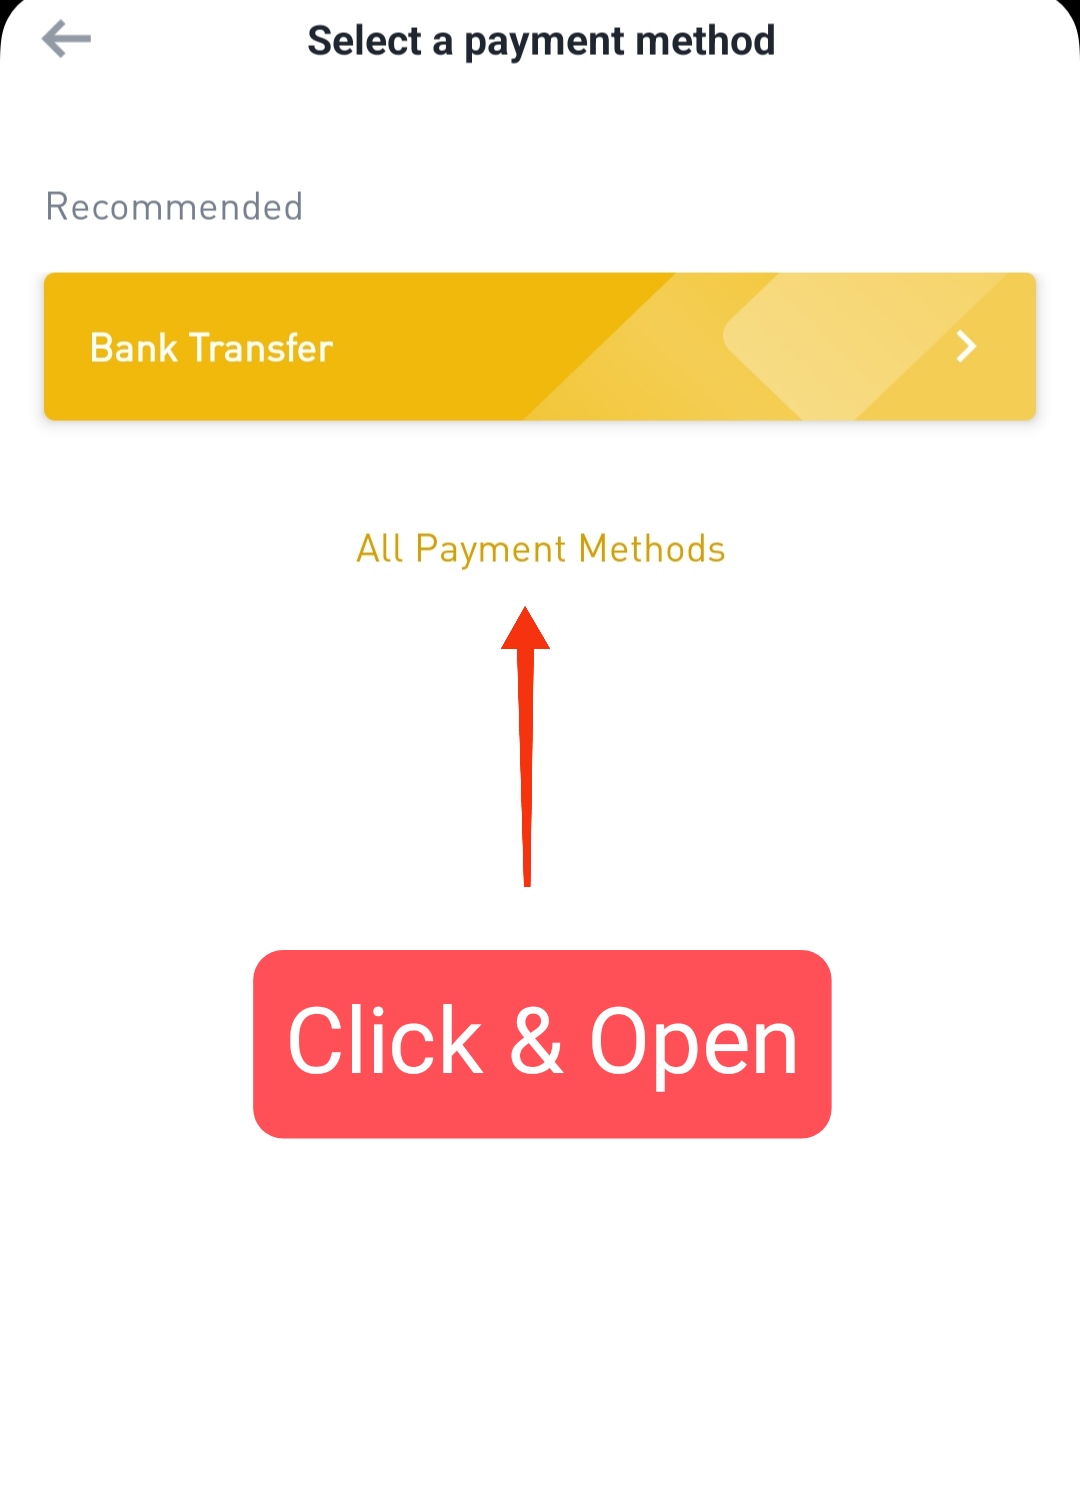 Now learn to add your account in other option “All Payment Method”. For this click on All Payment Method.